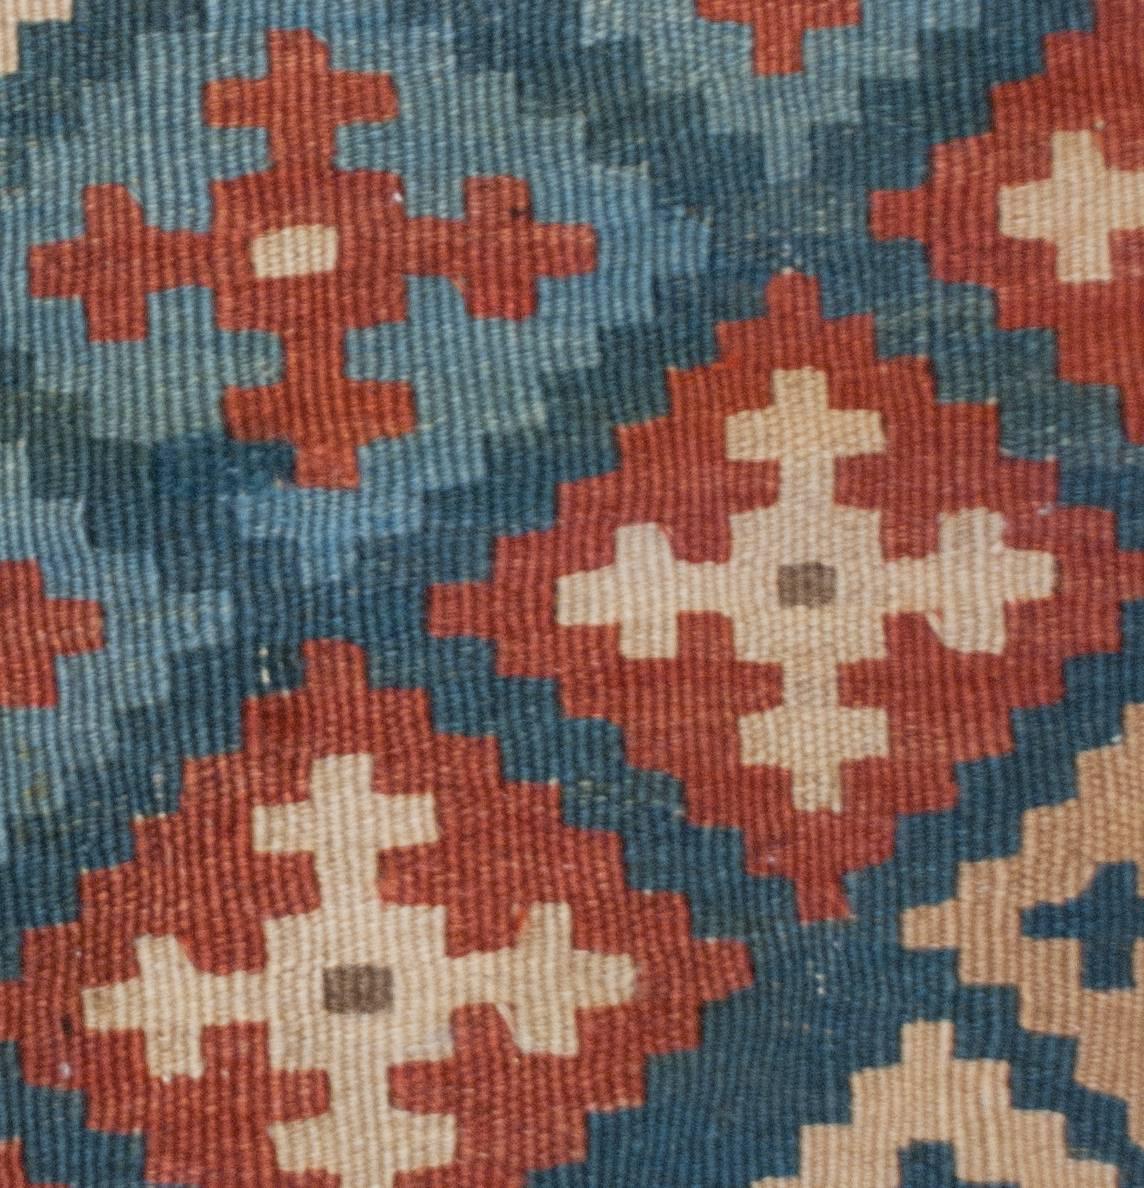 A wonderful early 20th century Shahsavan Kilim rug with a traditional multi-colored crimson, sage green, indigo, and pink diamond pattern composed in a diagonal stripe running across the field. The border is wide with hexagonal forms dotting the